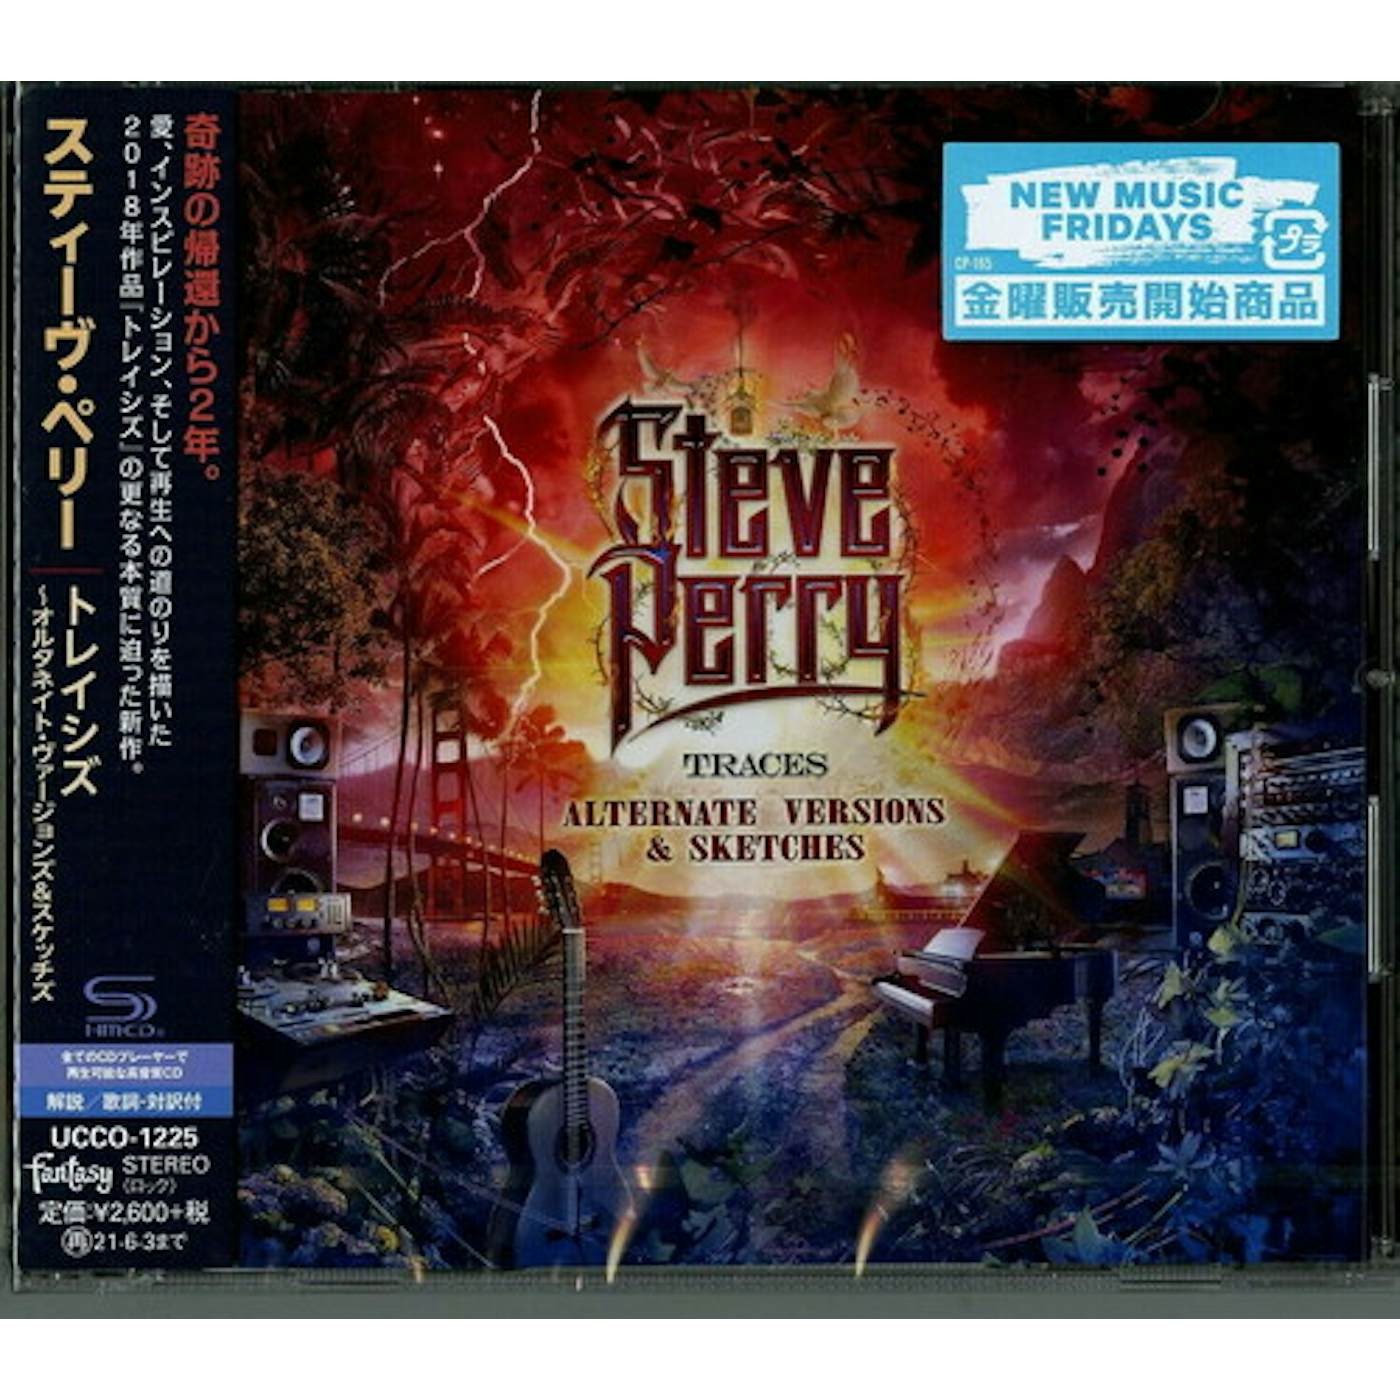 Steve Perry TRACES ALTERNATIVE VERSIONS & SKETCHES CD